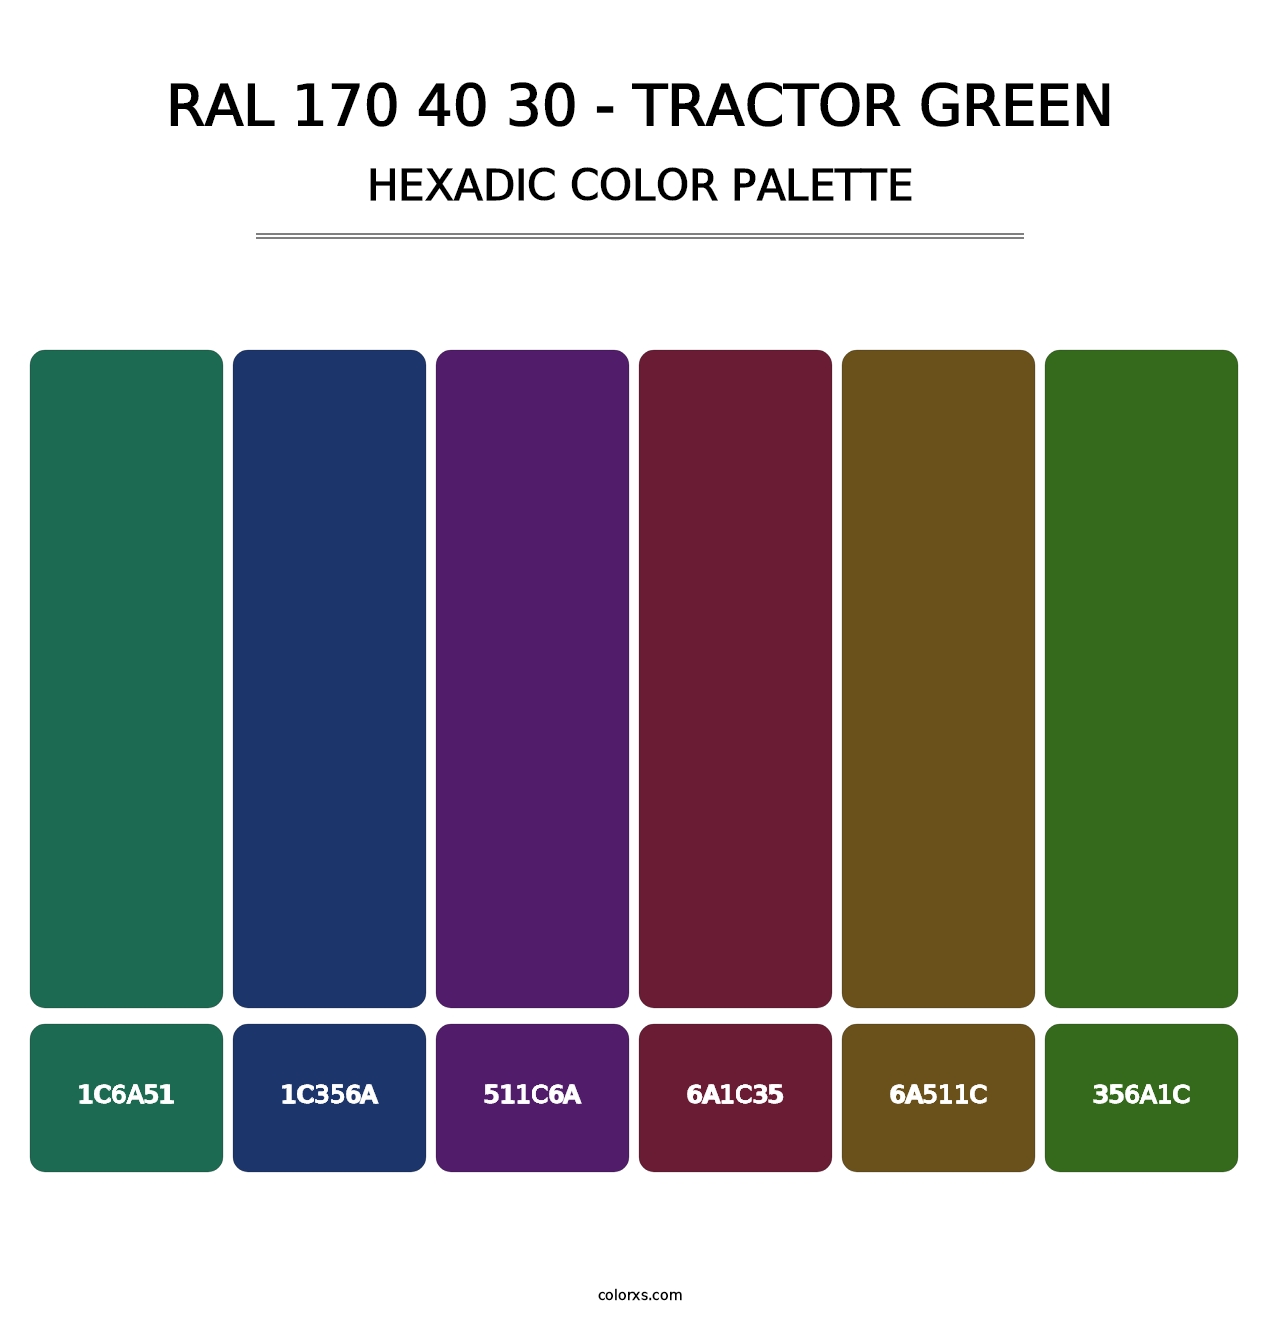 RAL 170 40 30 - Tractor Green - Hexadic Color Palette